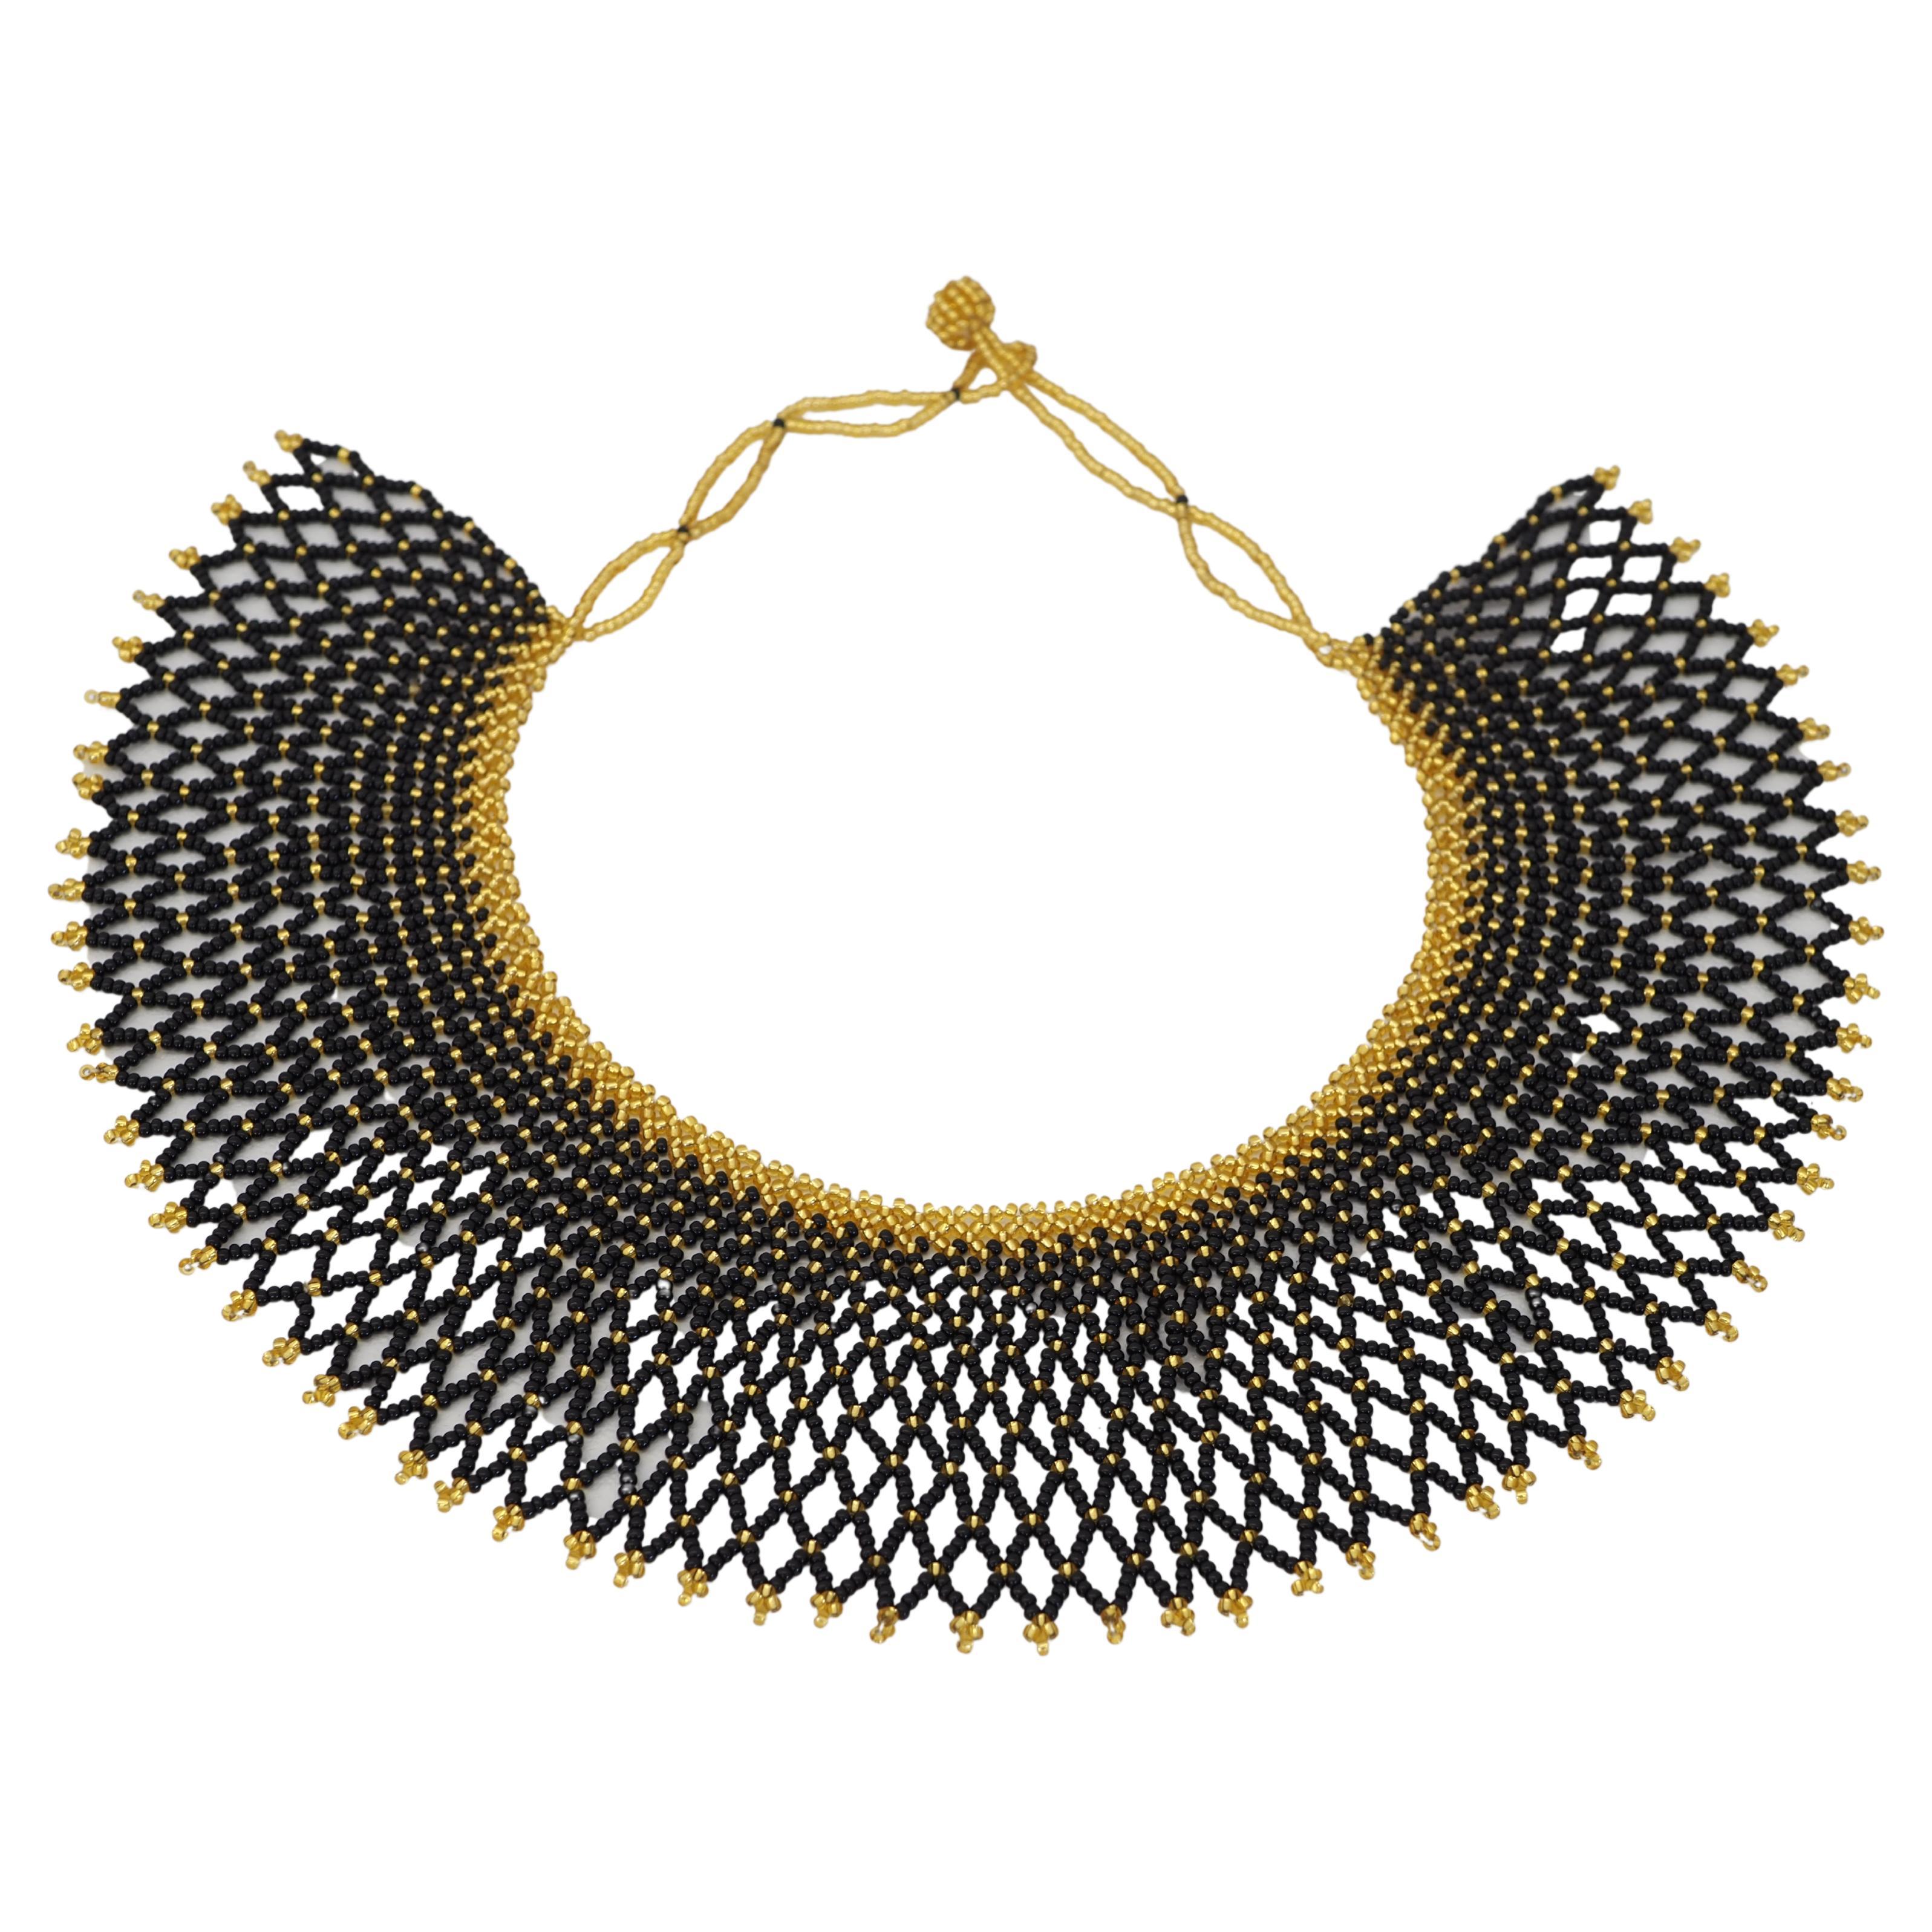 Vintage Black and gold tone beads necklace